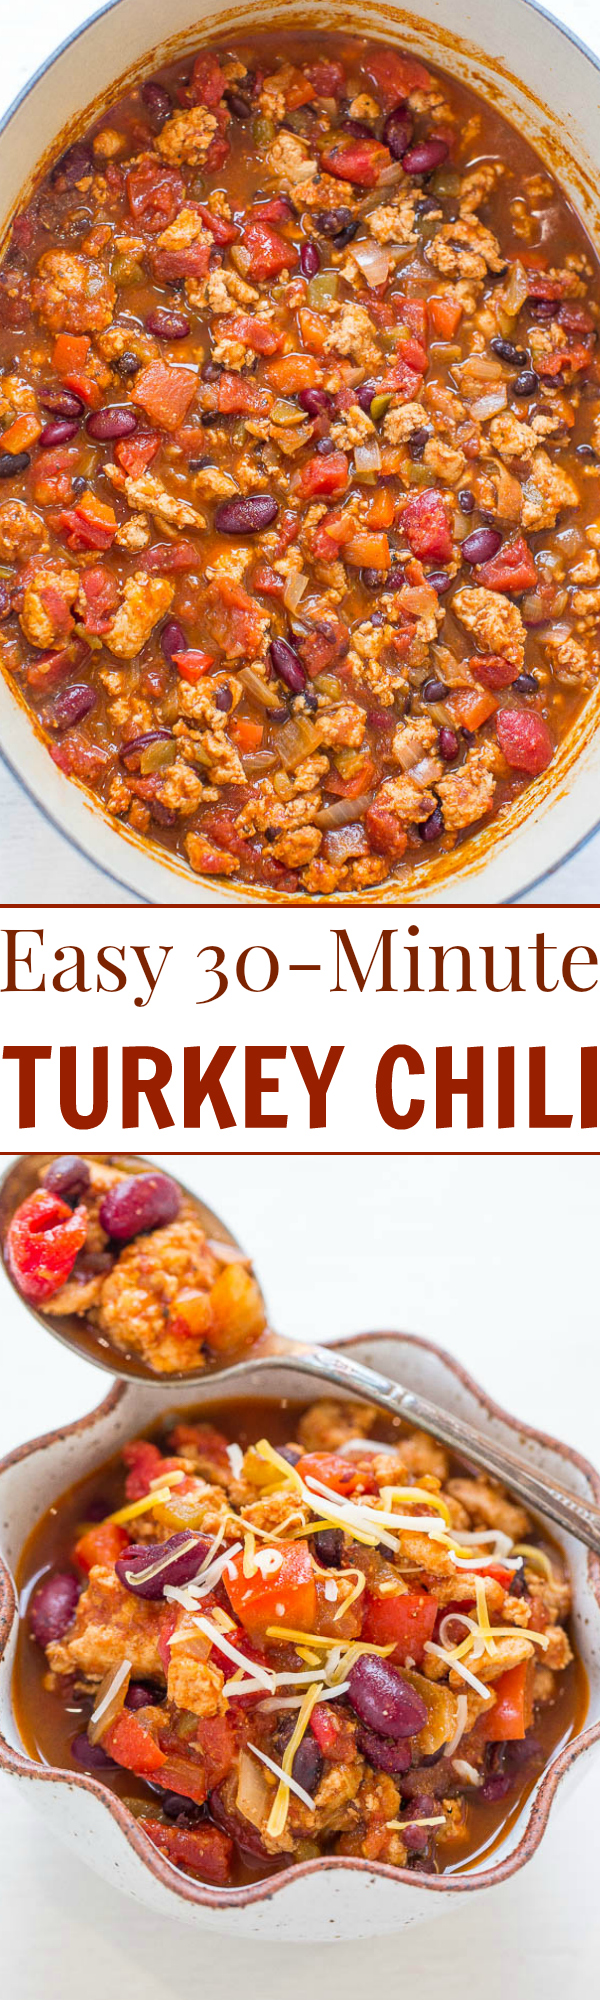 The BEST Healthy Turkey Chili Recipe (30 Minutes!) - Averie Cooks